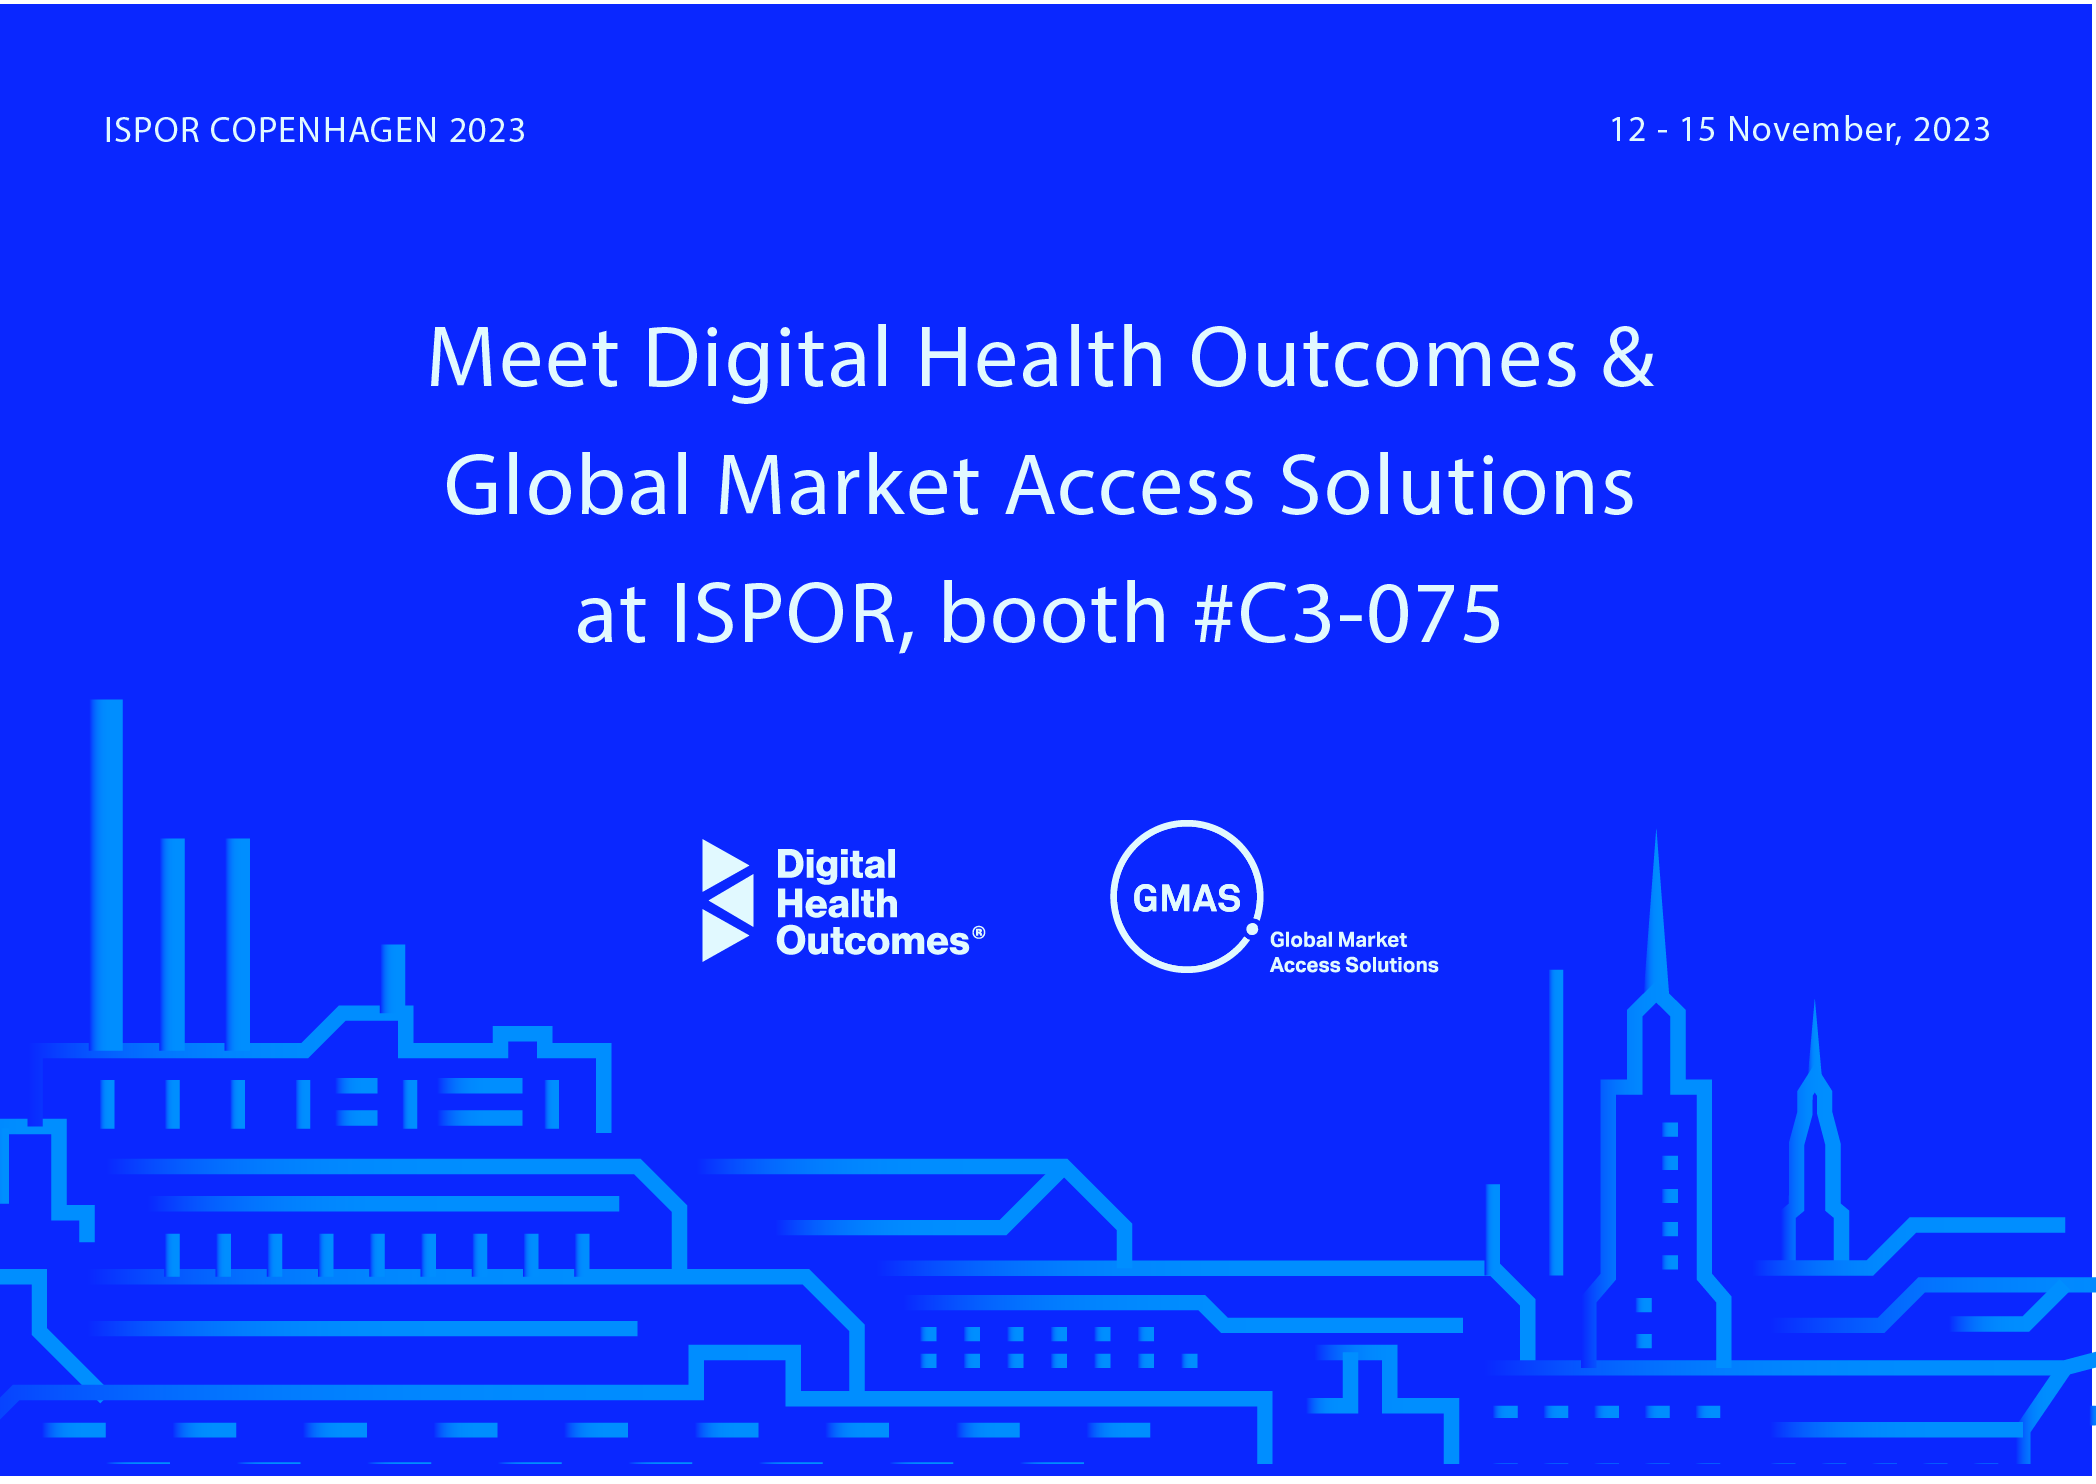 Meet Digital Health Outcomes and Global Market Access Solutions at ISPOR Europe 2023